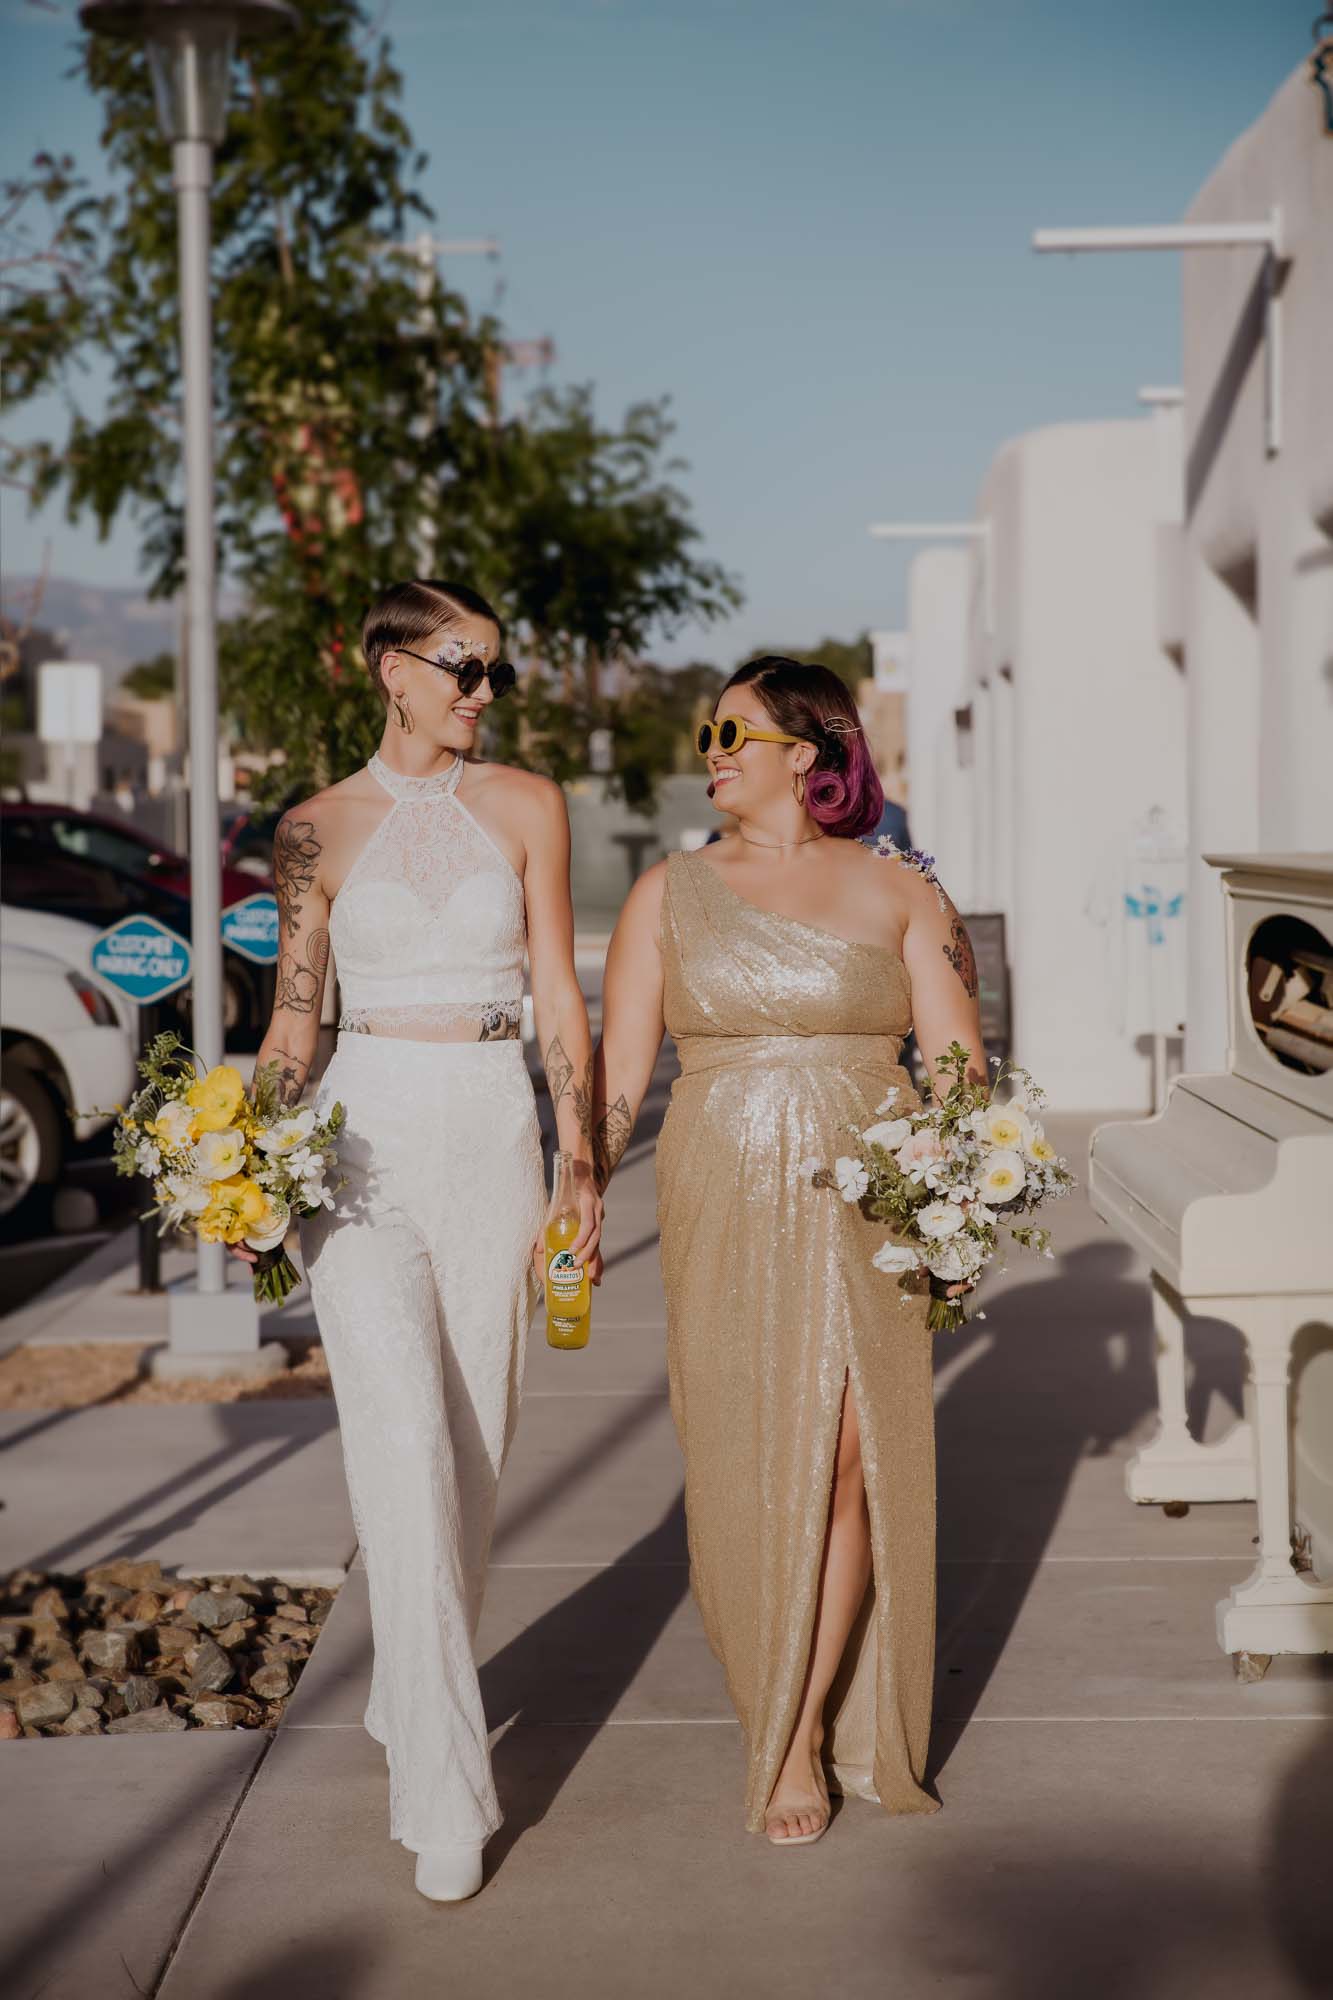 Bright and cheery 60s-inspired wedding ideas | Claire Gutierrez Photography | Featured on Equally Wed, the leading LGBTQ+ wedding magazine